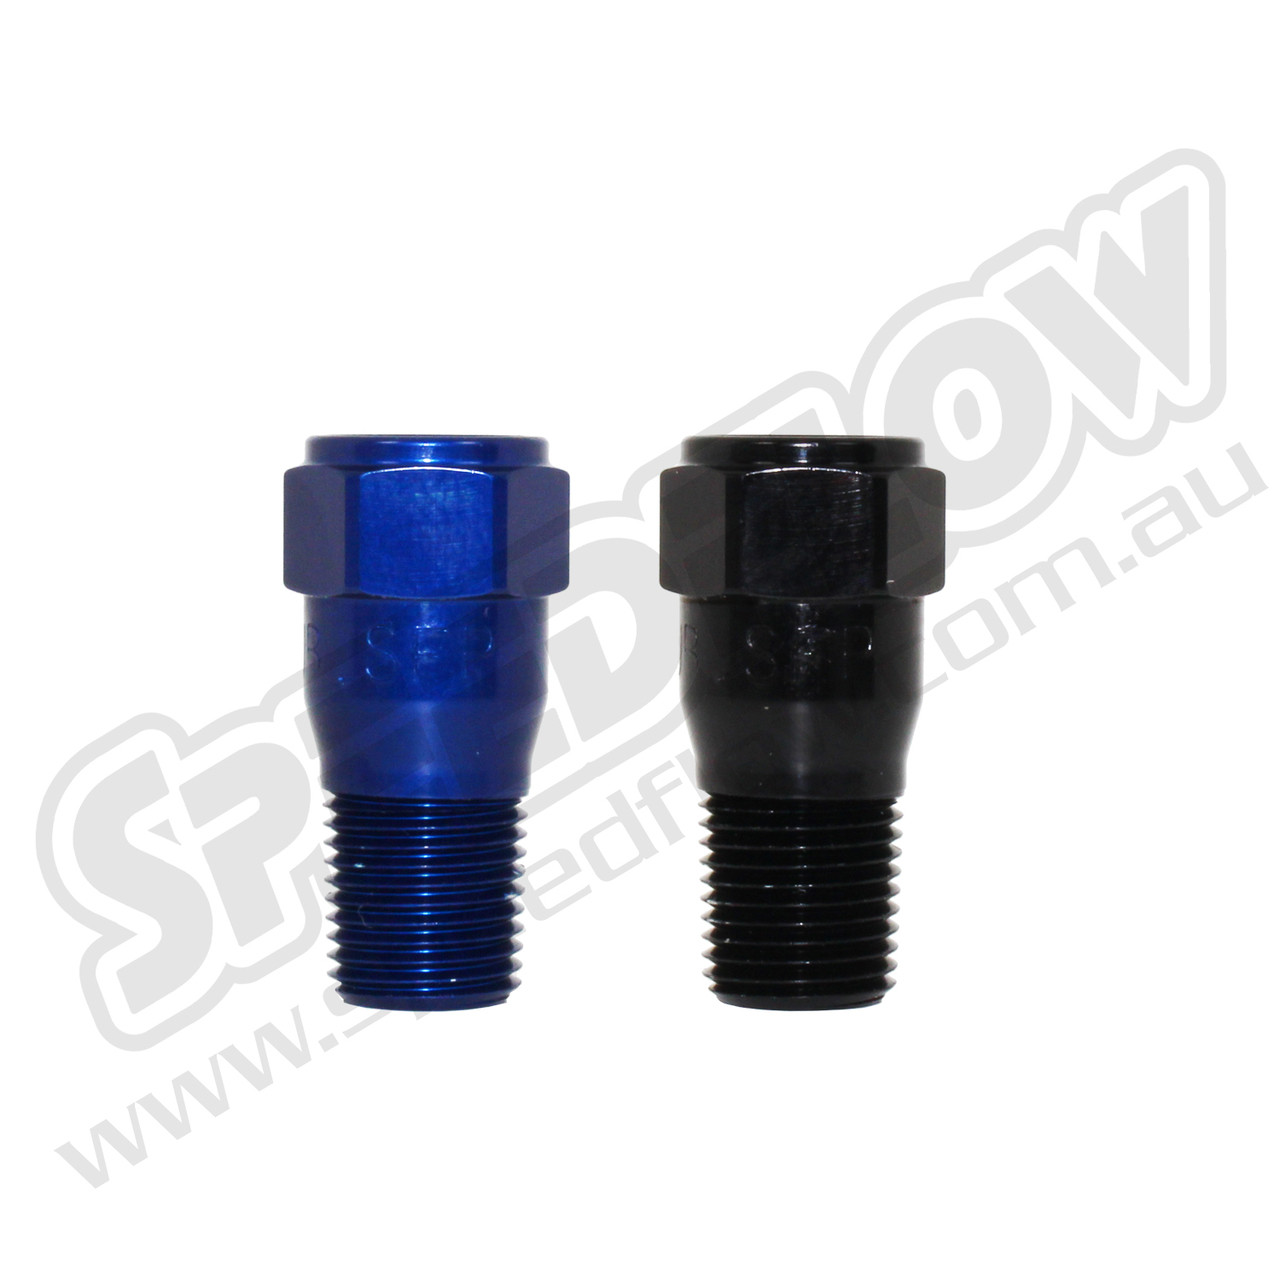 1/8NPT Female to Male Short Extension - Speedflow Products Pty Ltd